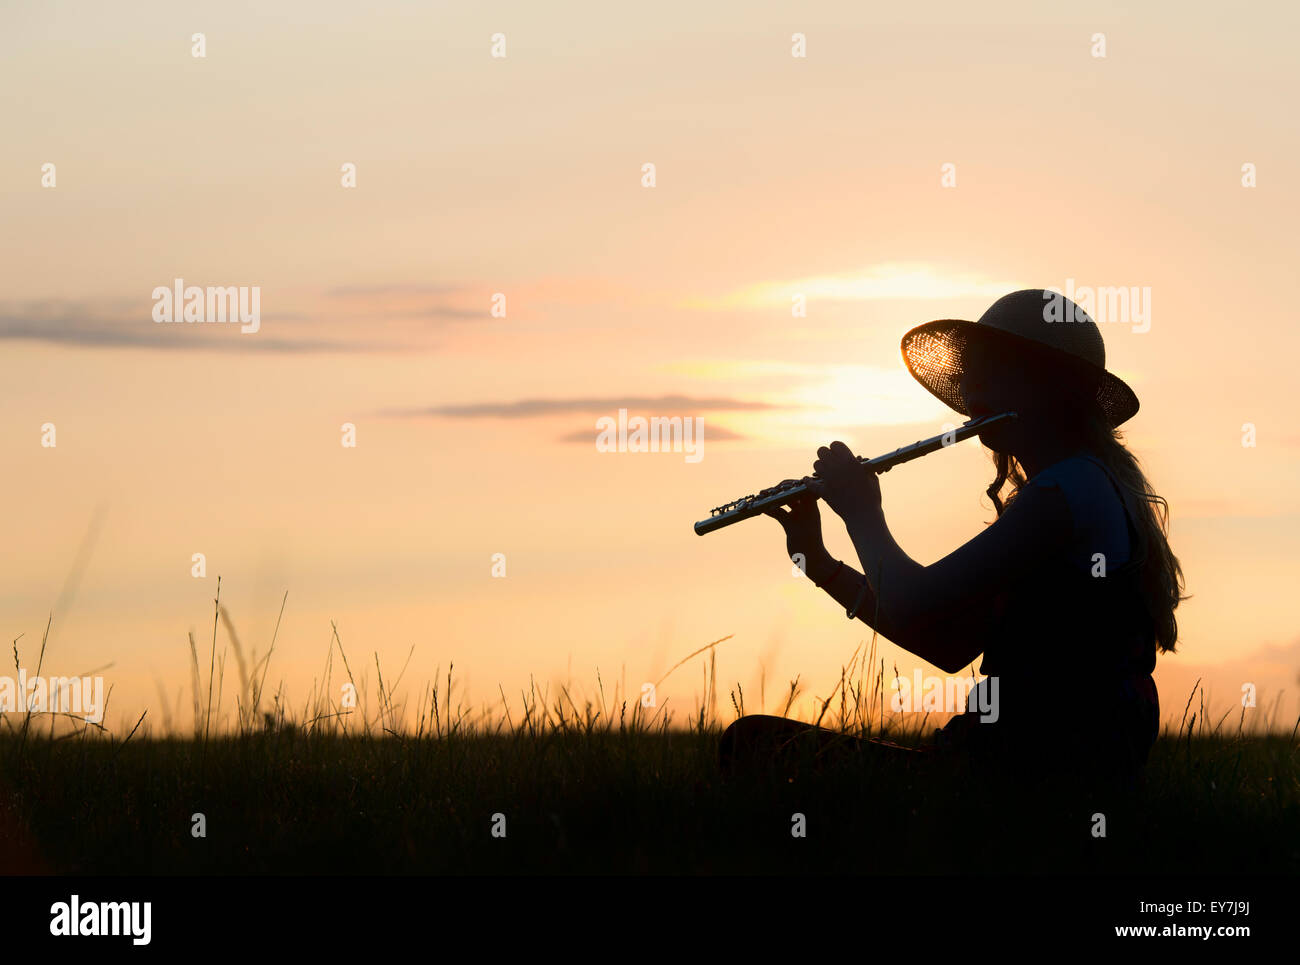 Teenage girl sat in the grass playing a flute at sunset. Silhouette Stock Photo